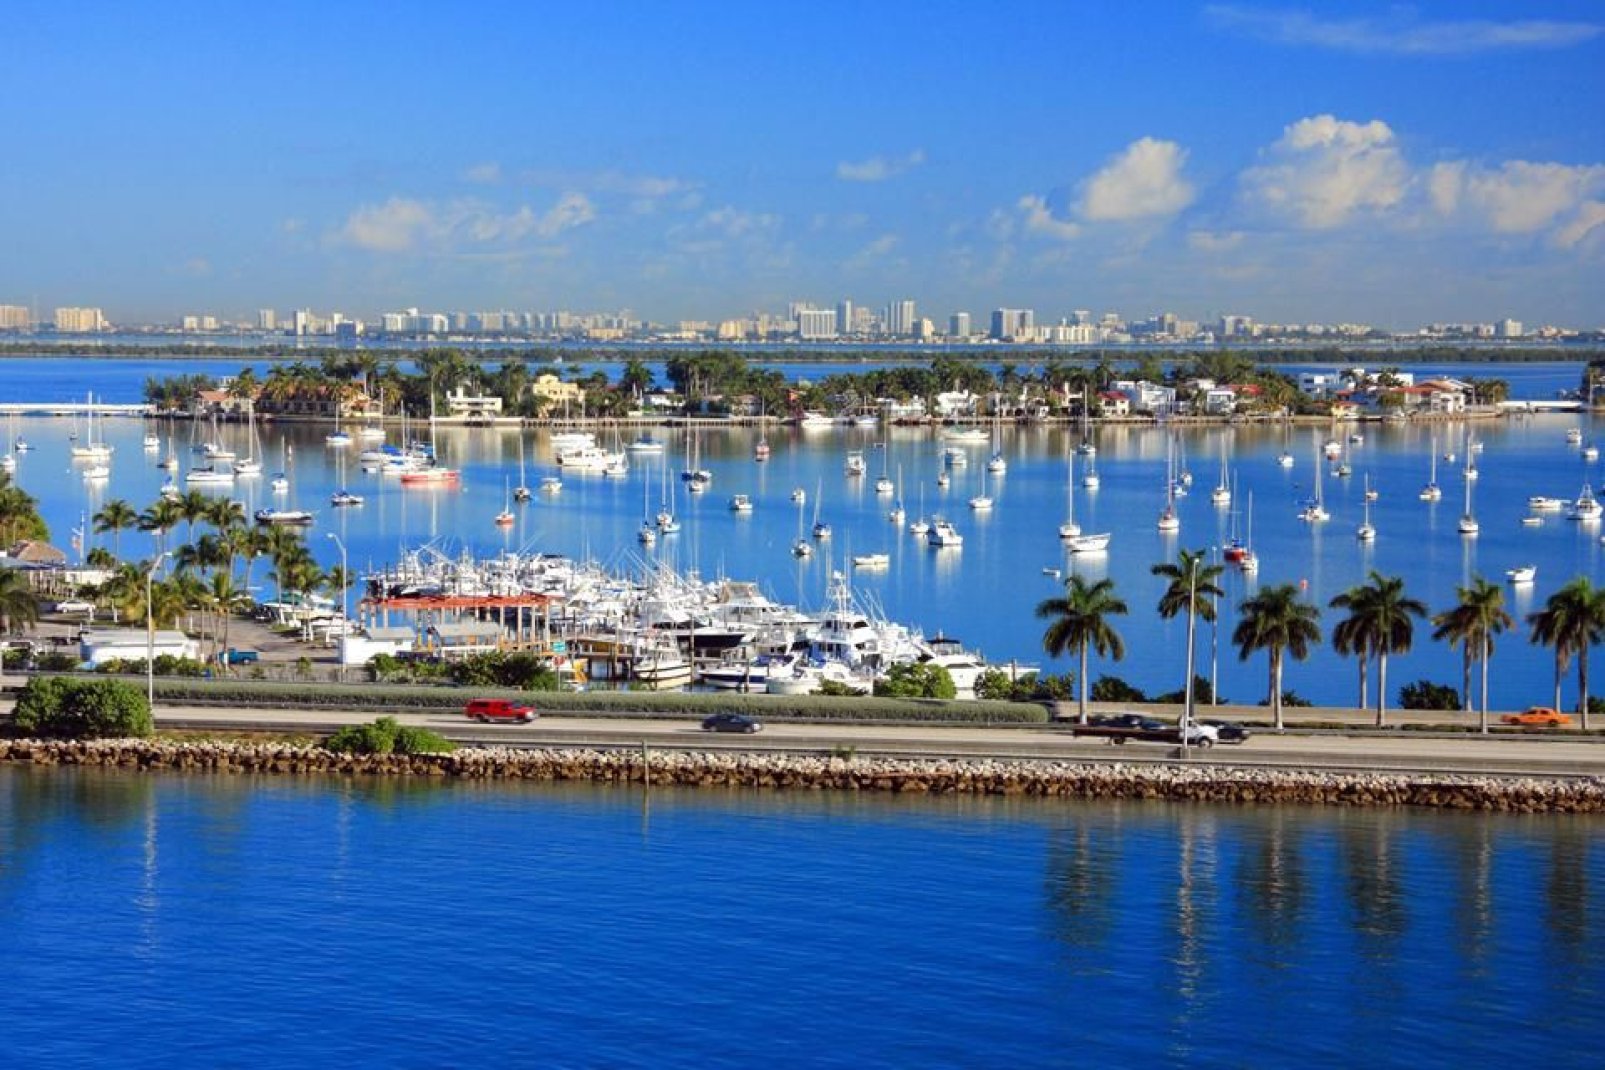 The Port of Miami is a major point of passage to the Americas. It is also the cruise capital of the world.